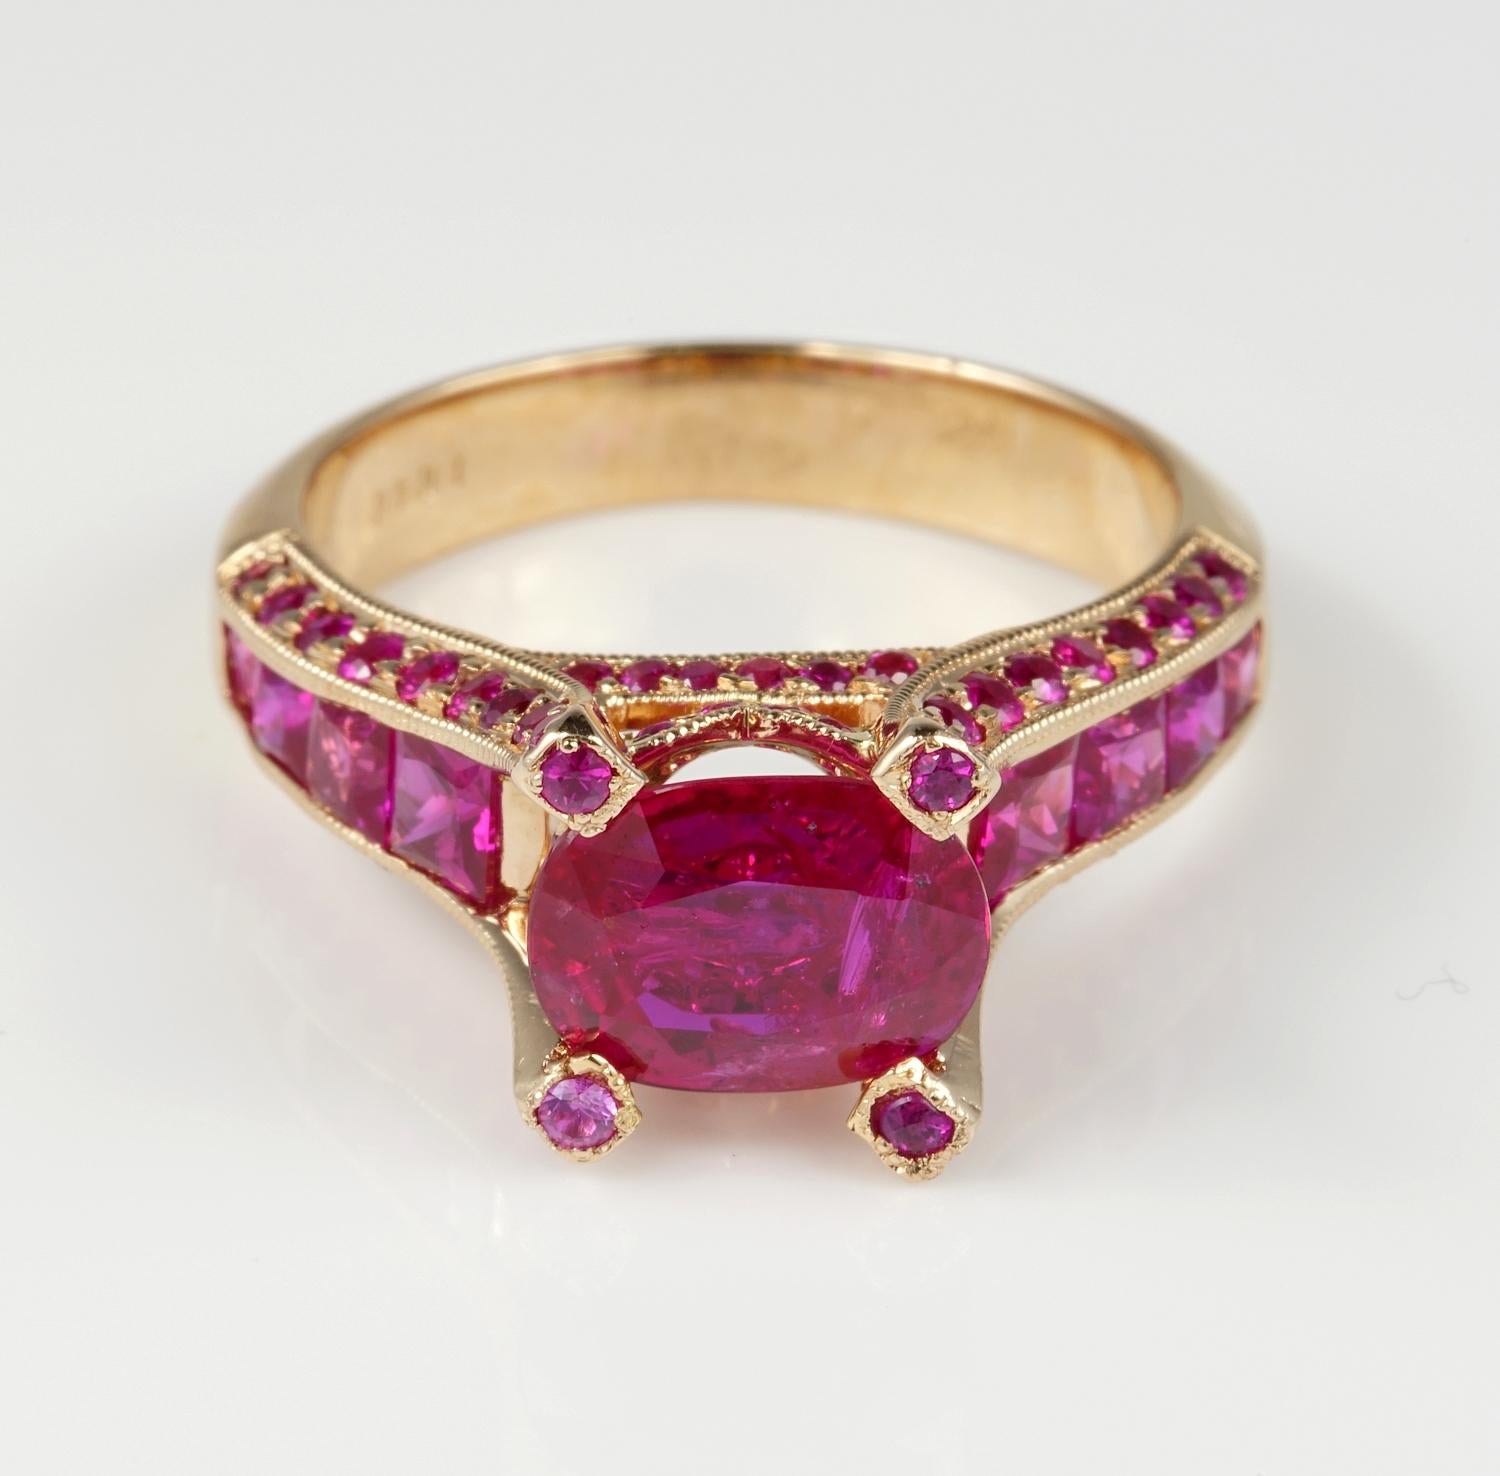 The flame of passion

This one-of-a-kind Natural No heat Ruby radiates with exceptional colour totally given by nature.

Simply divine in its mounting exclusively designed to make out the absolute best of it.

A totally natural no heat Ruby of